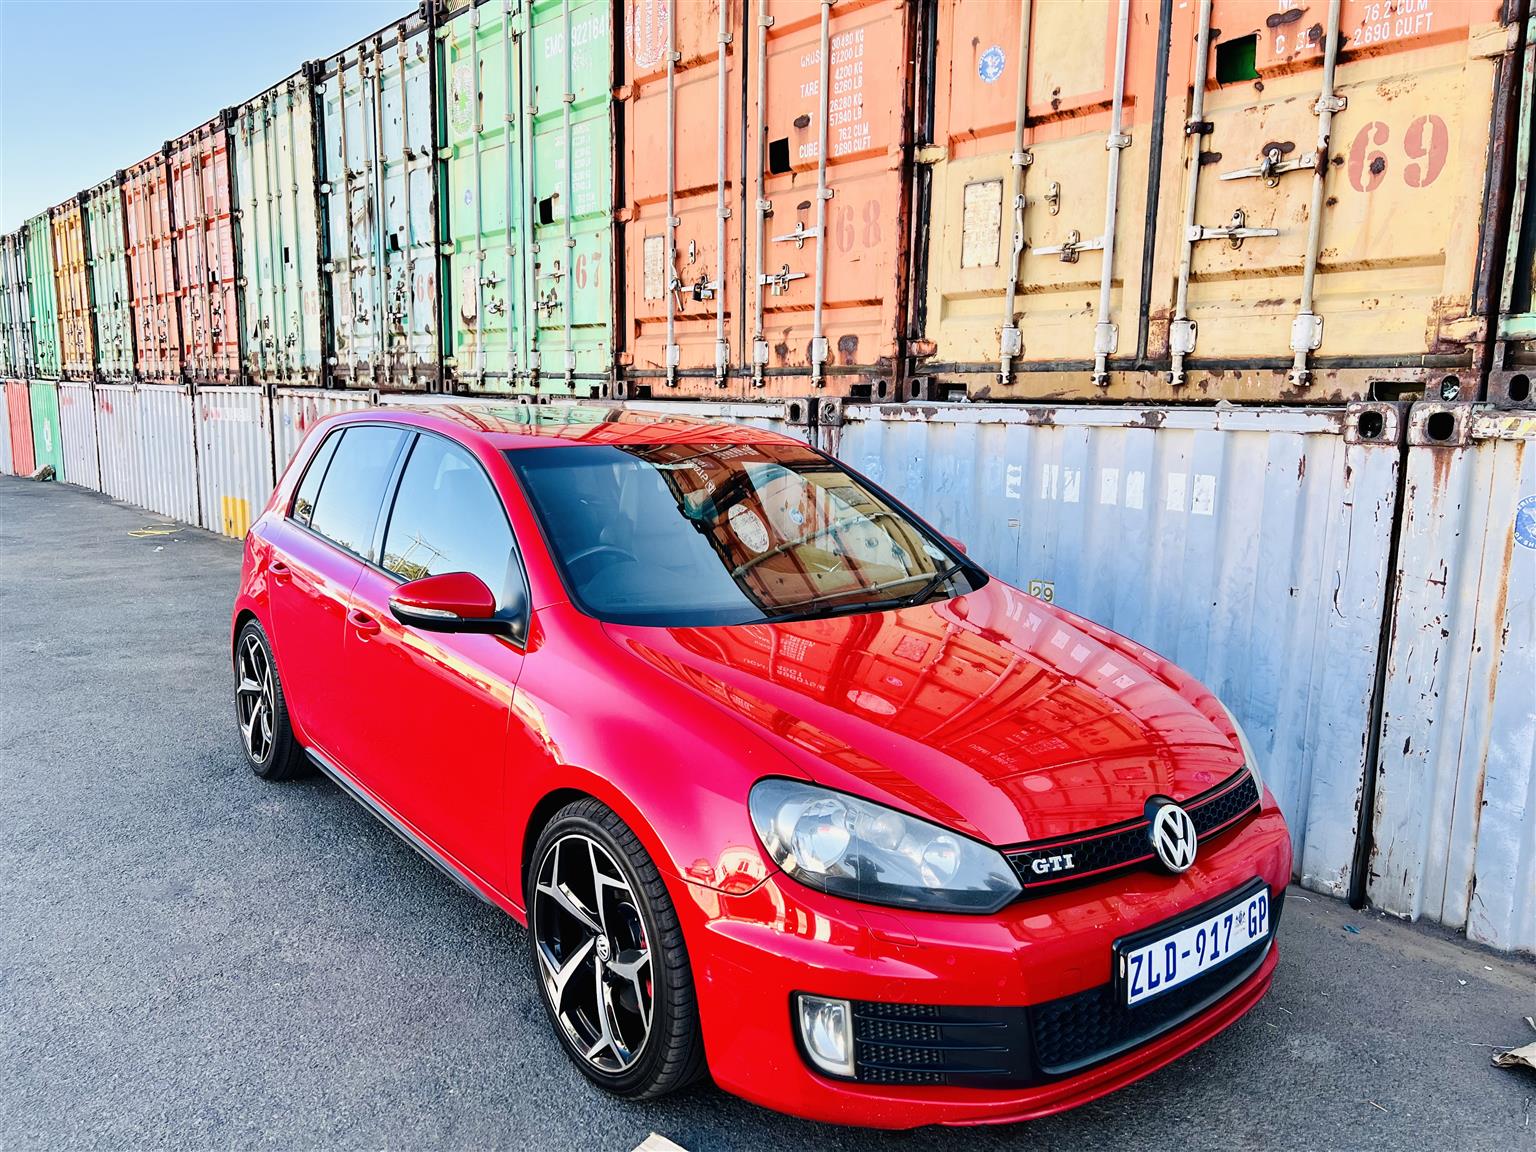 GOLF 6 GTI for sale